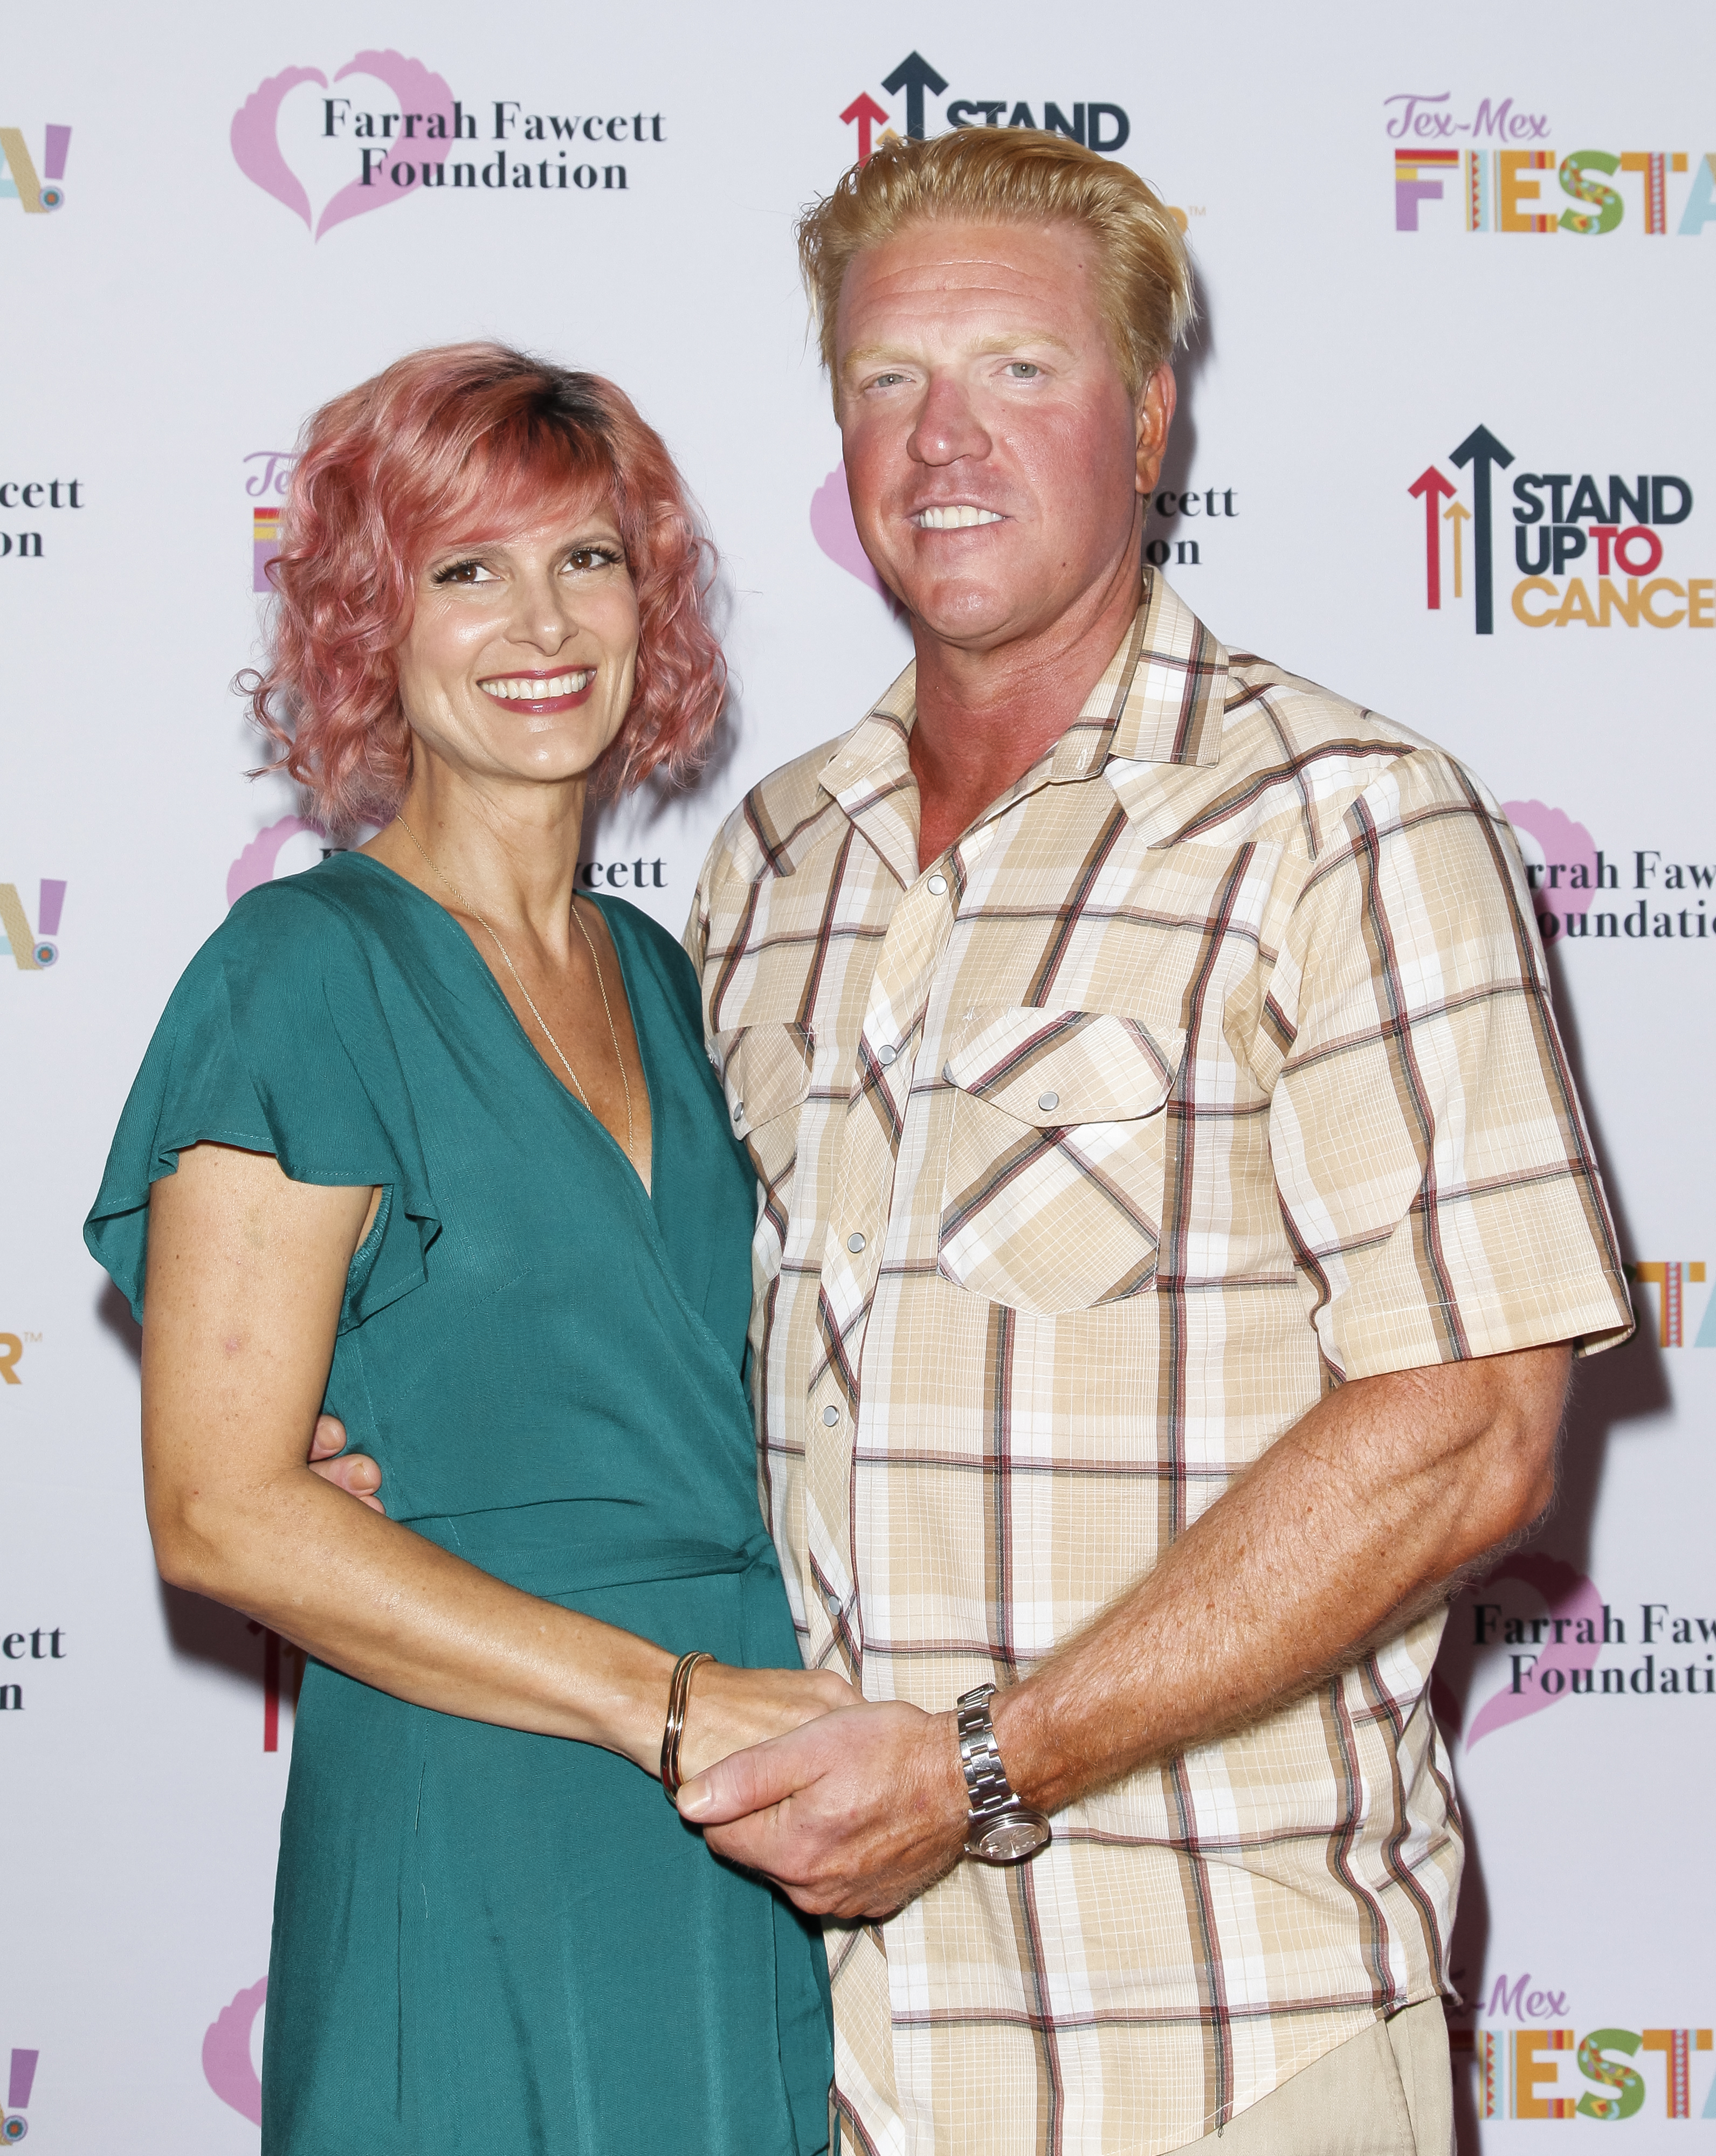 April Hutchinson and Jake Busey attend the Farrah Fawcett Foundation's Tex-Mex Fiesta at Wallis Annenberg Center for the Performing Arts on September 6, 2019, in Beverly Hills, California. | Source: Getty Images